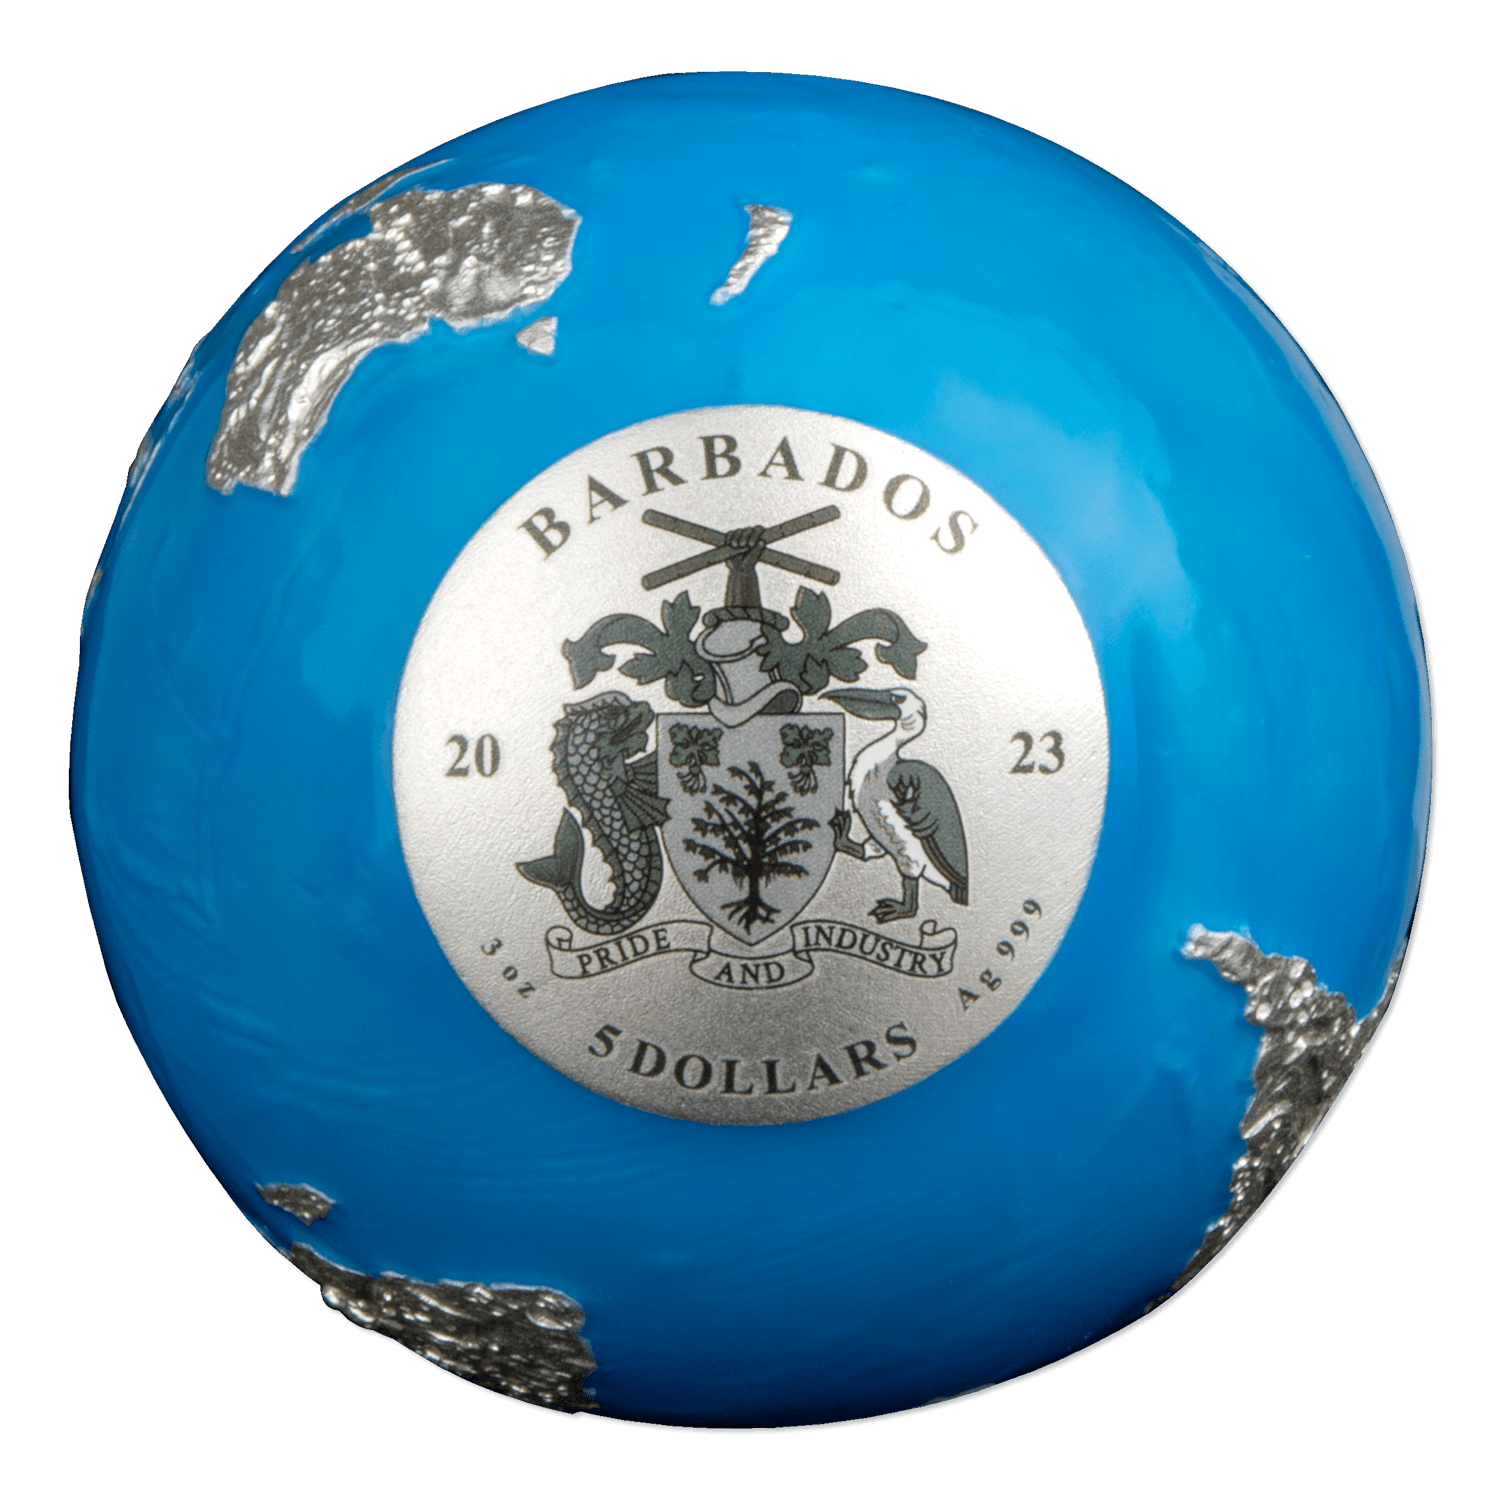 BLUE MARBLE Glow in the Dark Spherical 3 Oz Silver Coin $5 Barbados 2023 - PARTHAVA COIN